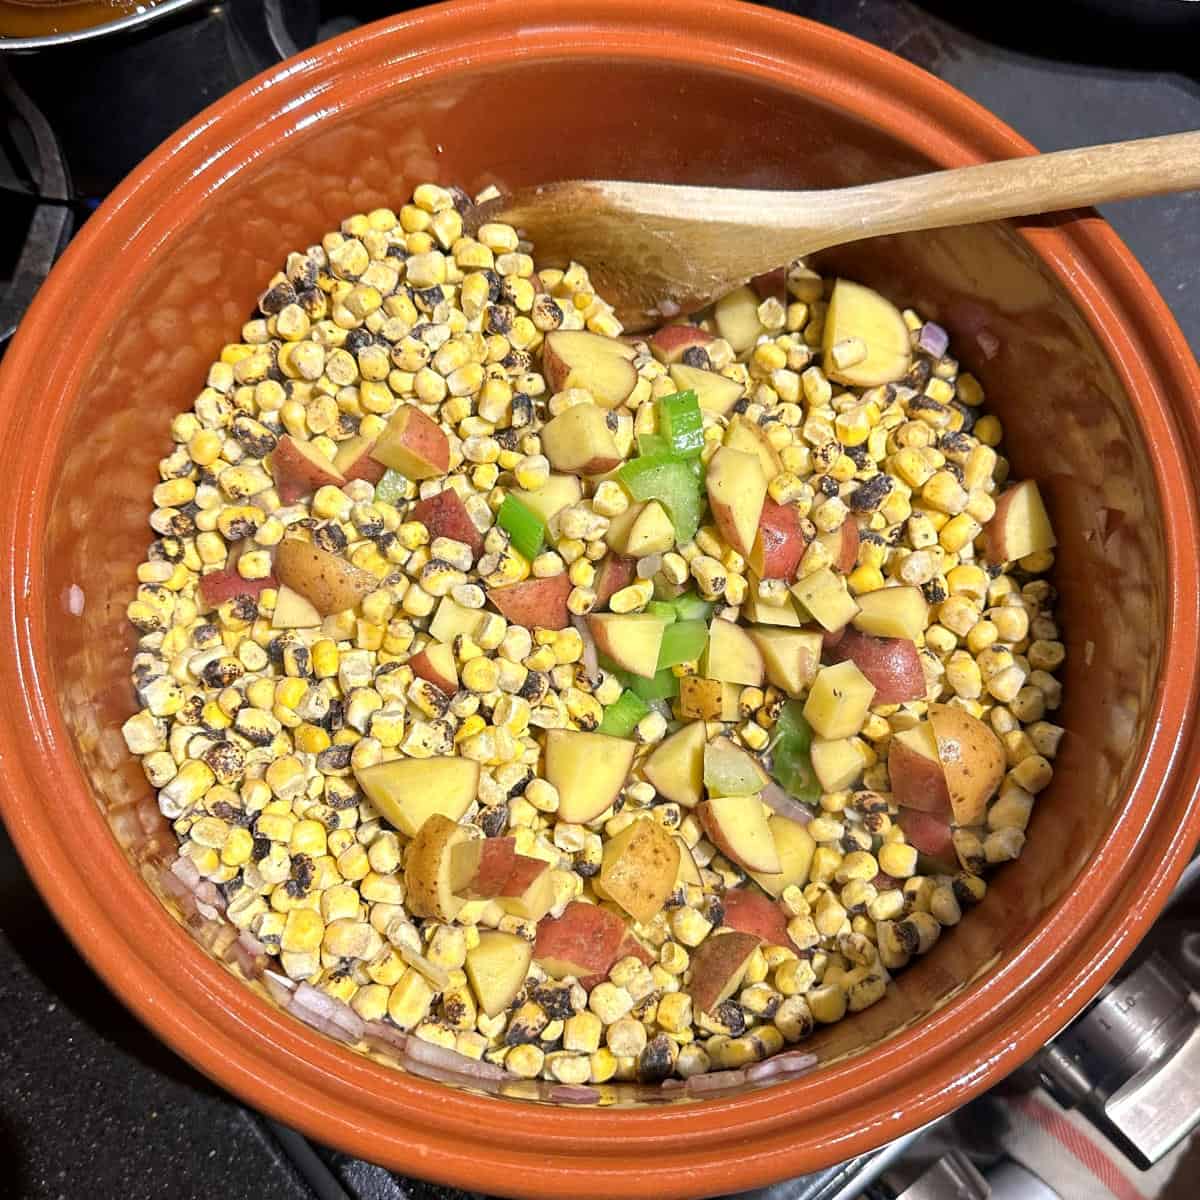 Fire roasted corn and potatoes added to pot with onions, celery and garlic.